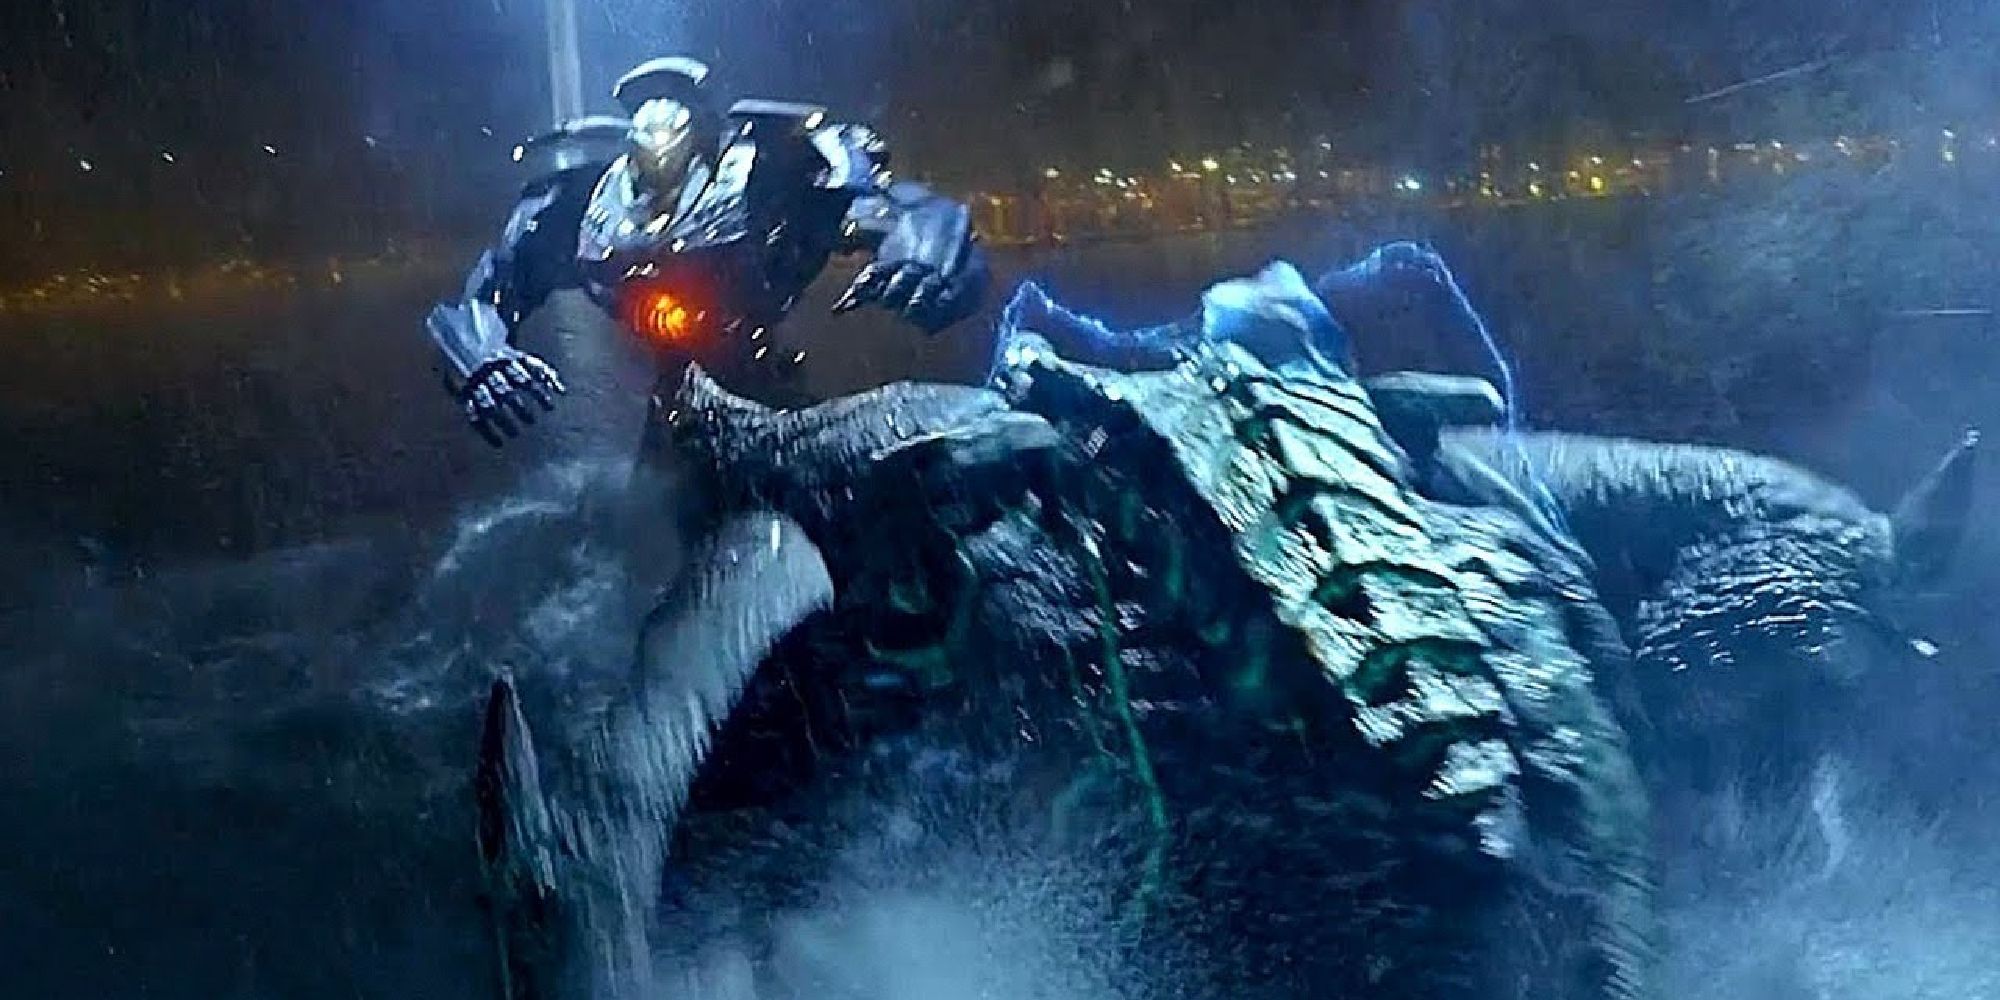 A Jaeger facing off against a Kaiju in waters near a city